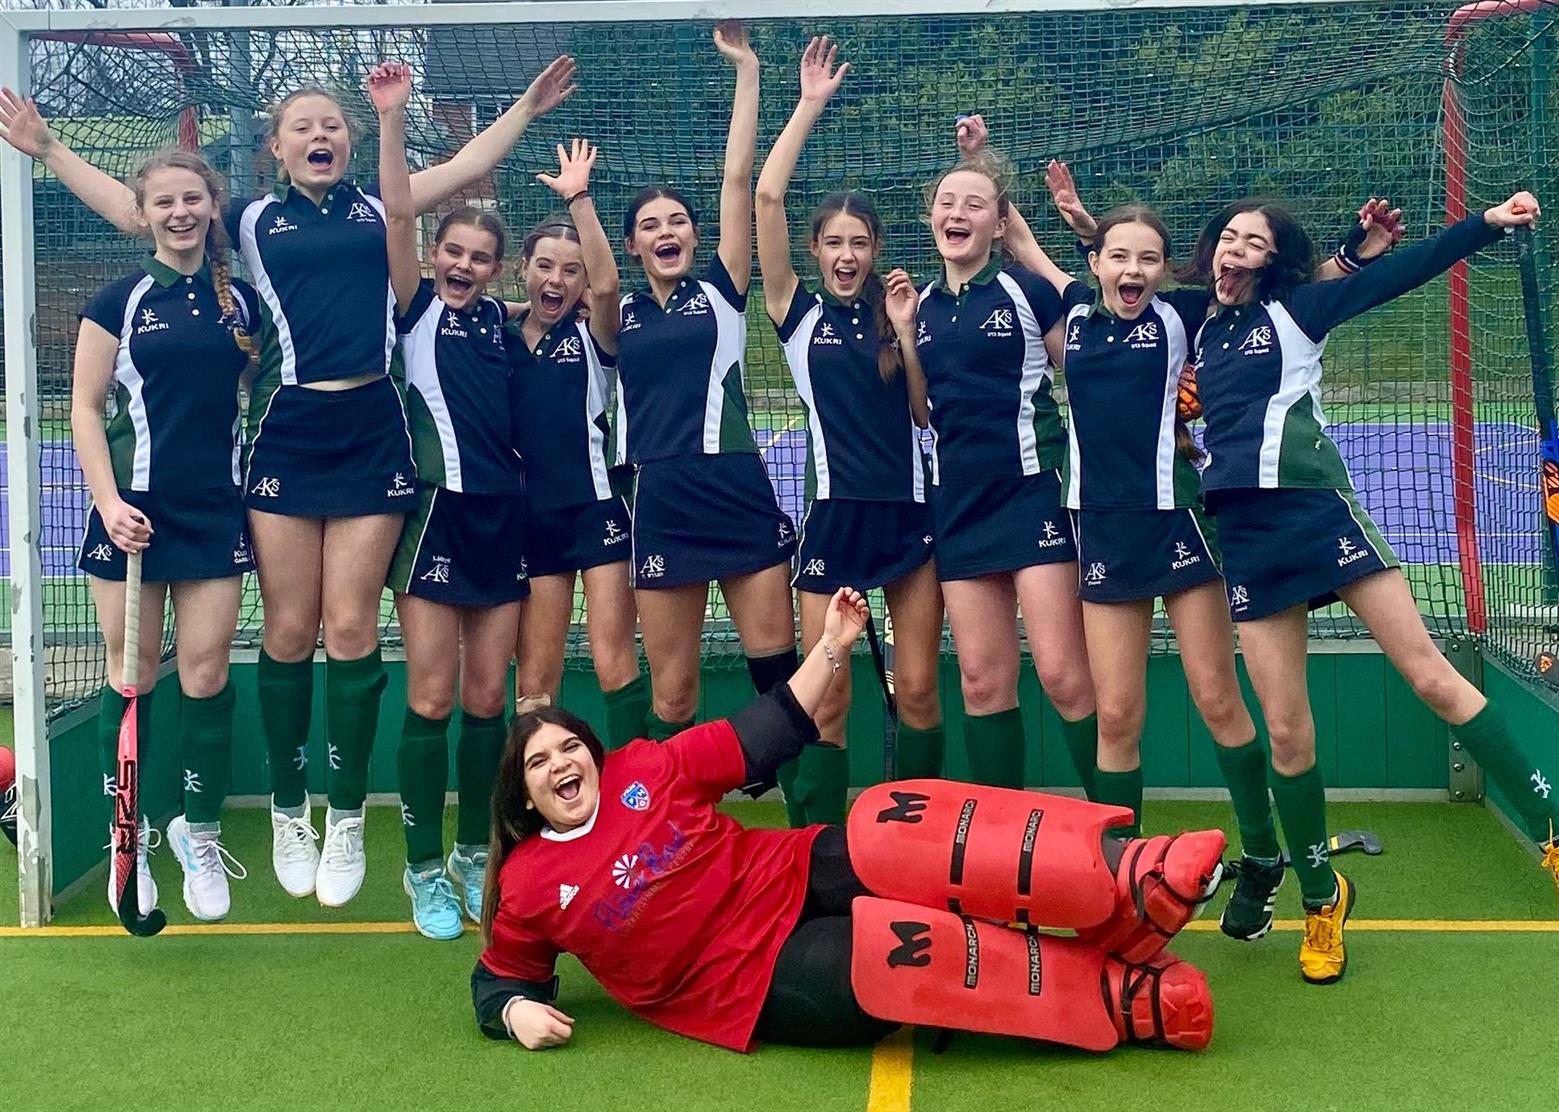 U13 Hockey Squad crowned North West Champions and qualify for National Finals